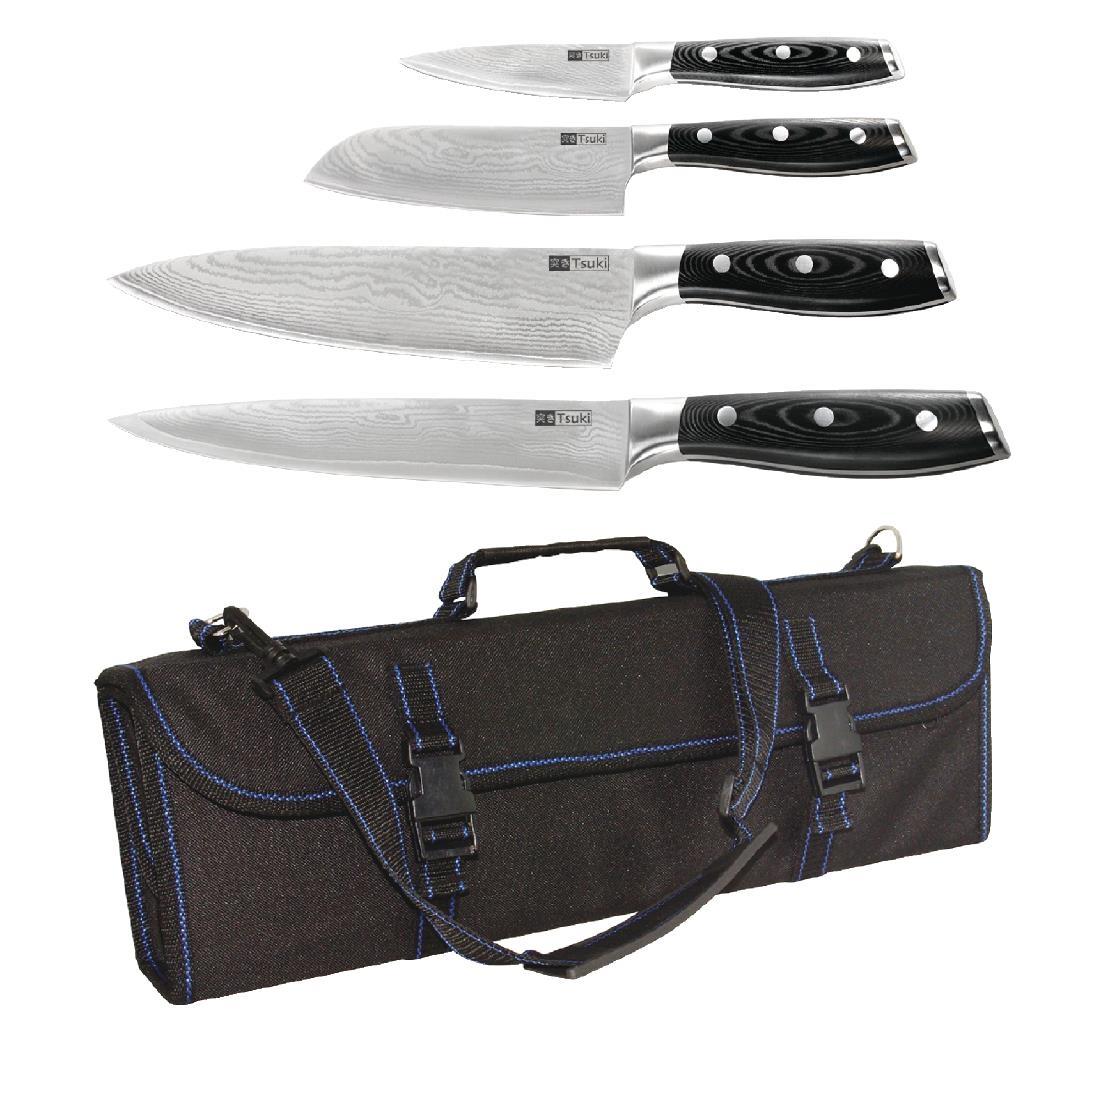 Vogue Tsuki 4 Piece Series 7 Knife Set and Case Special Offer - S704  - 1